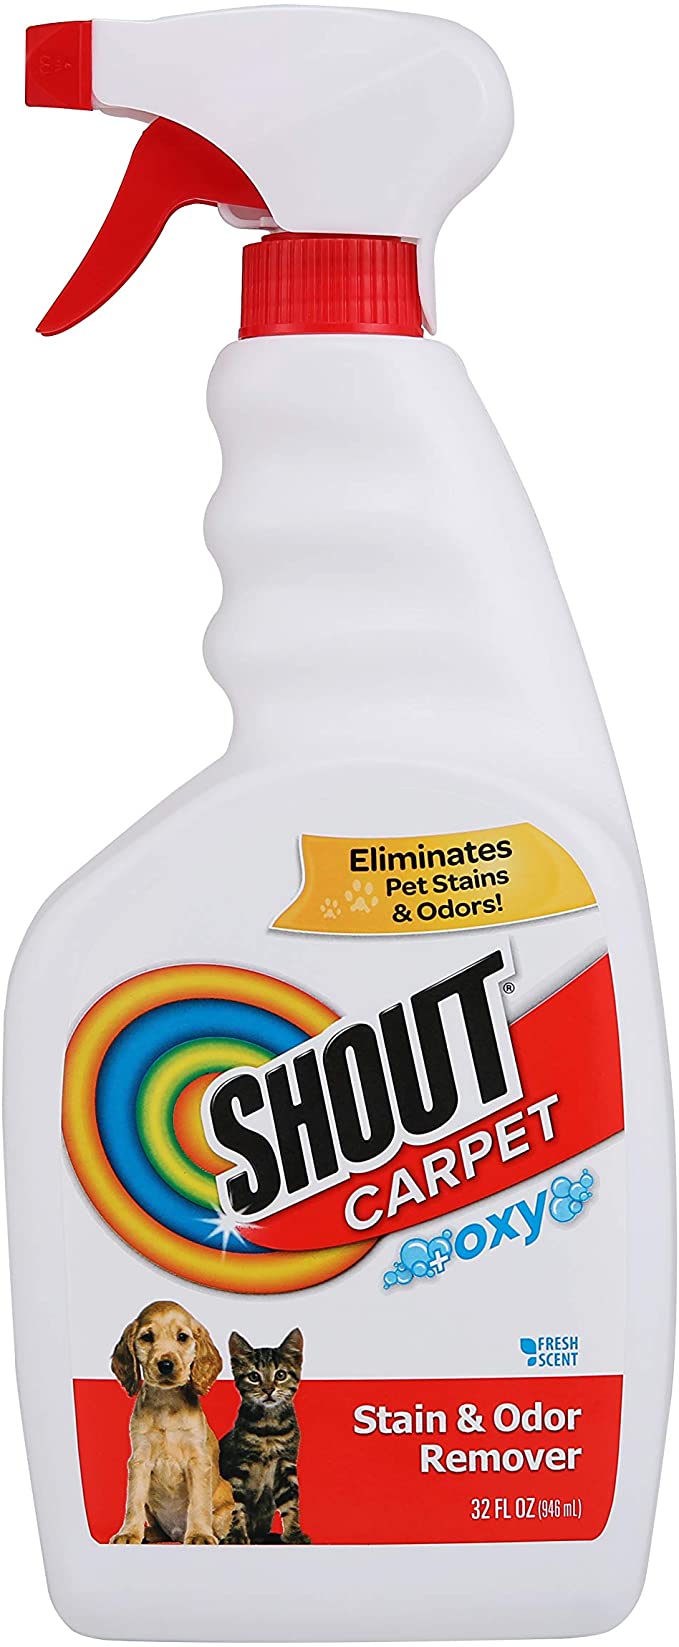 Shout Stain and Odor Remover Spray | Pet Stain Remover And Odor Eliminator